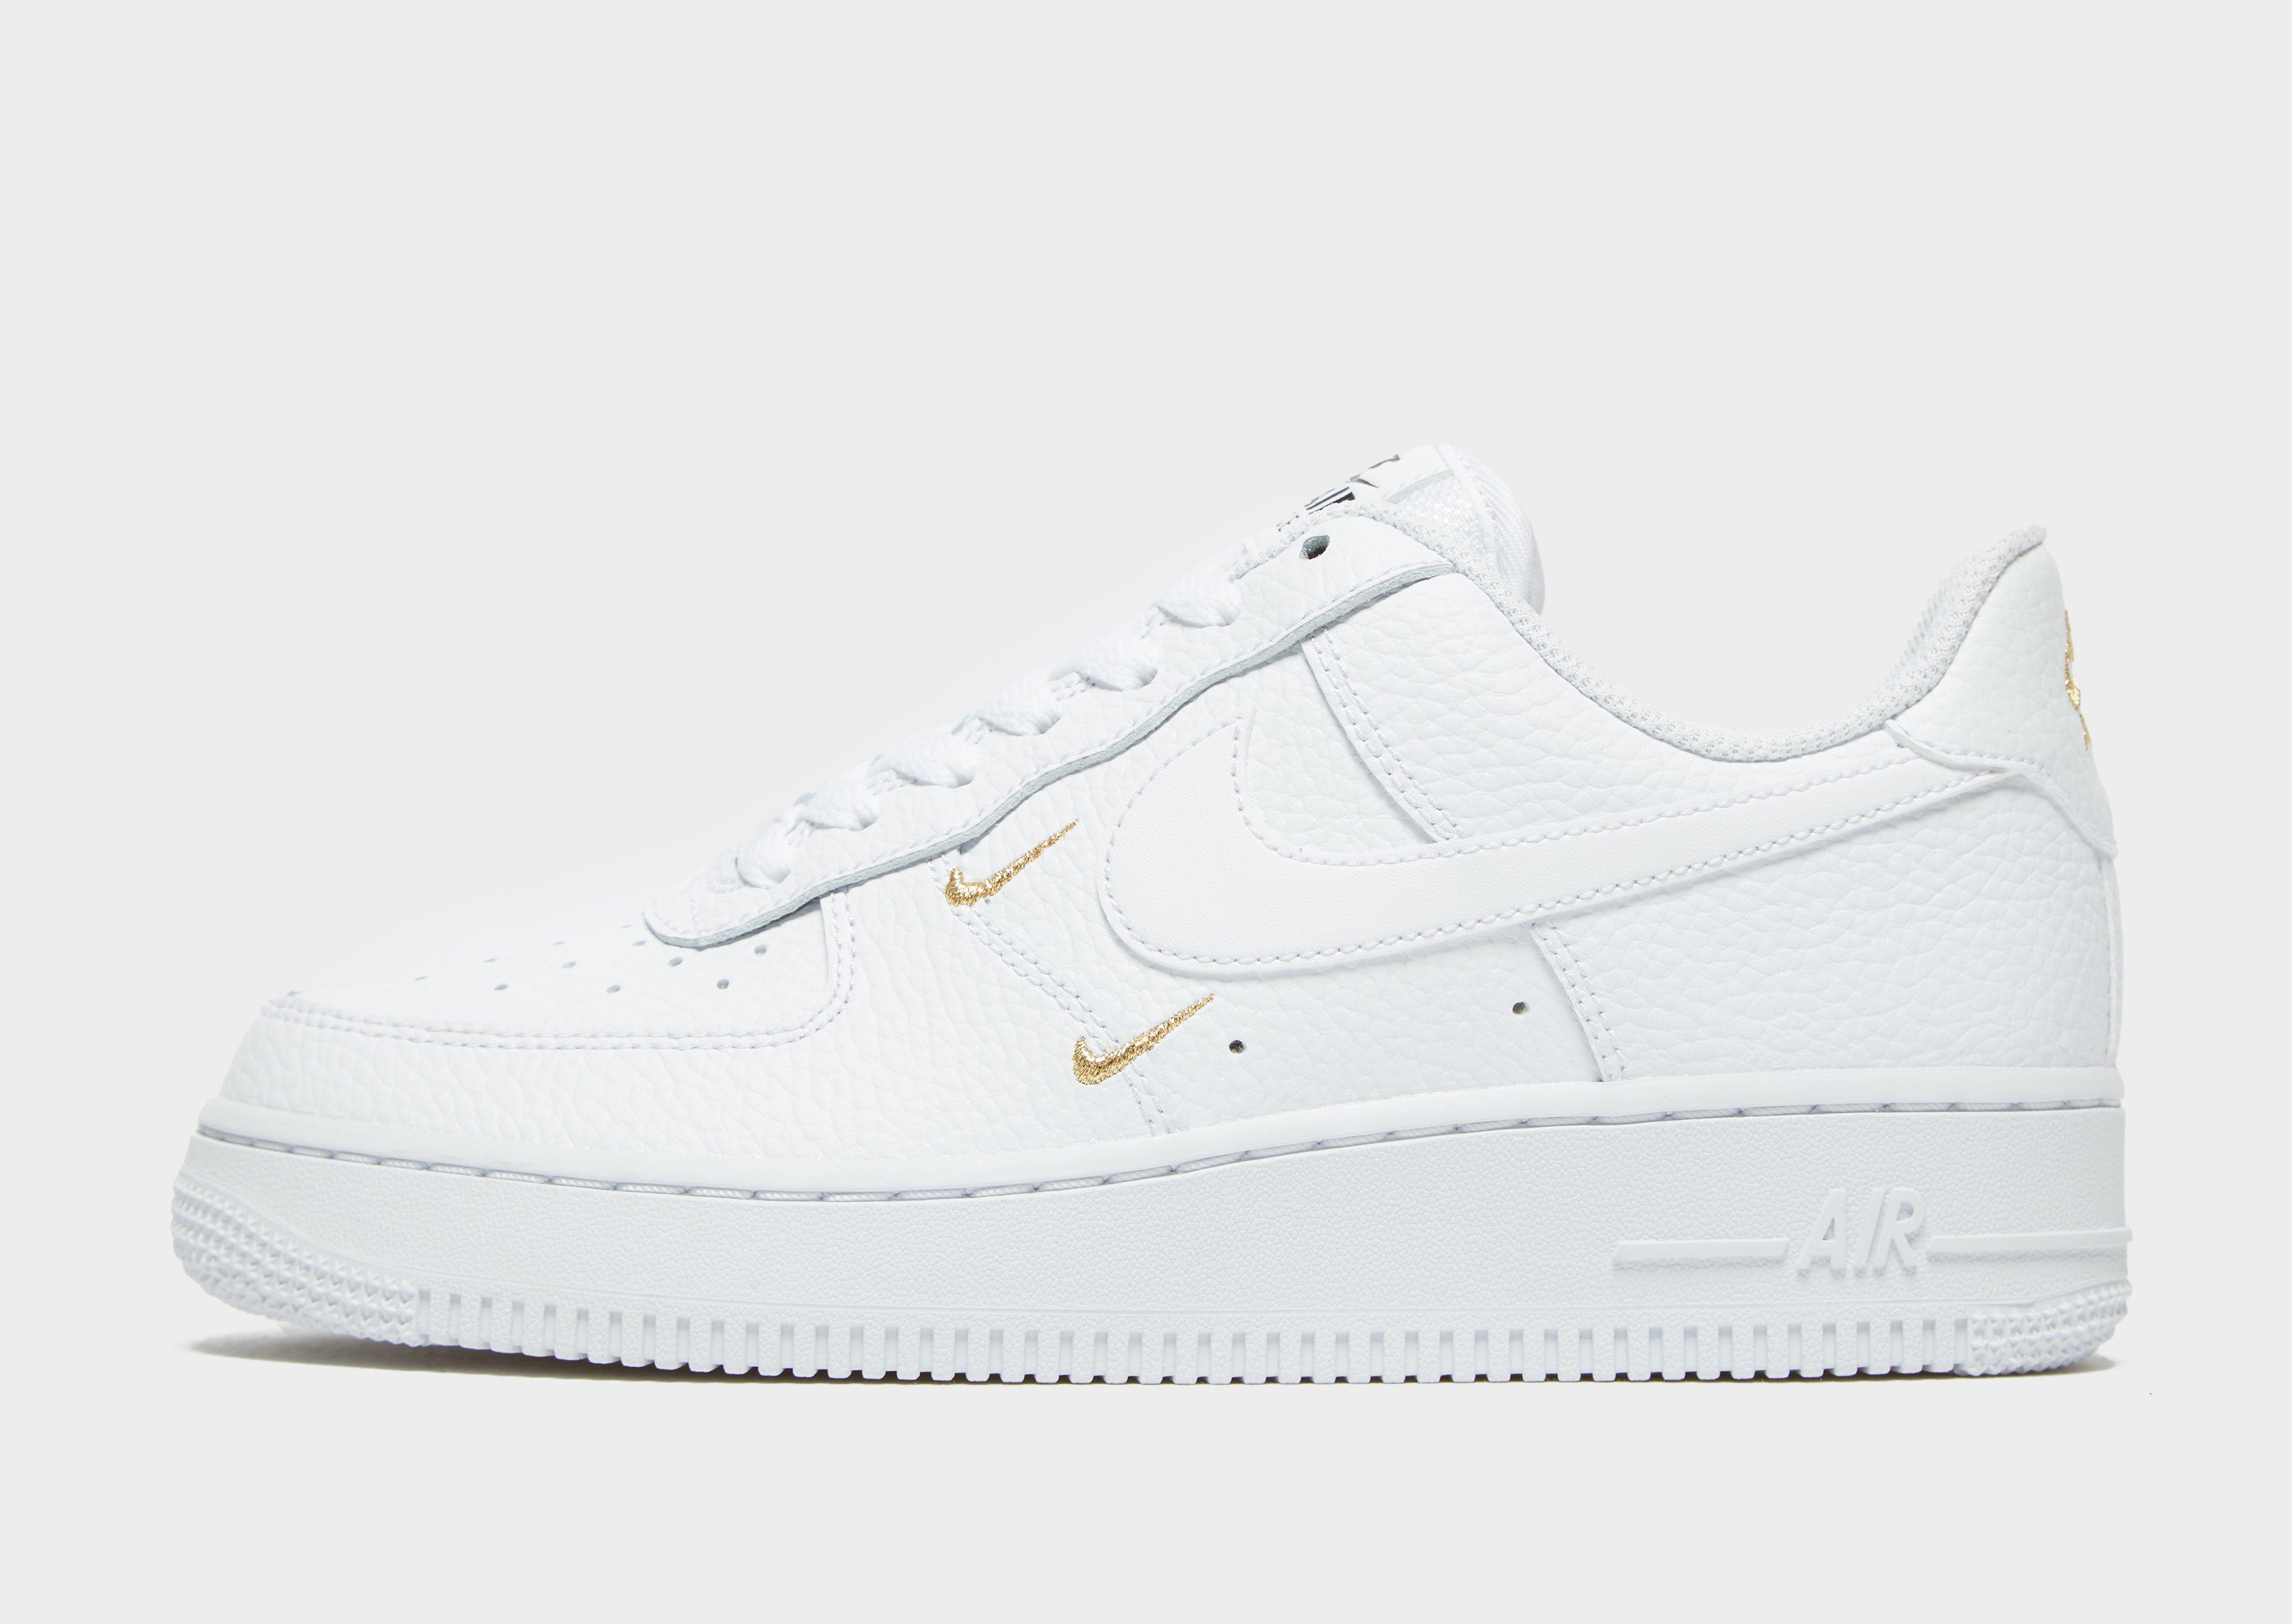 womens nike air force 1 with black swoosh